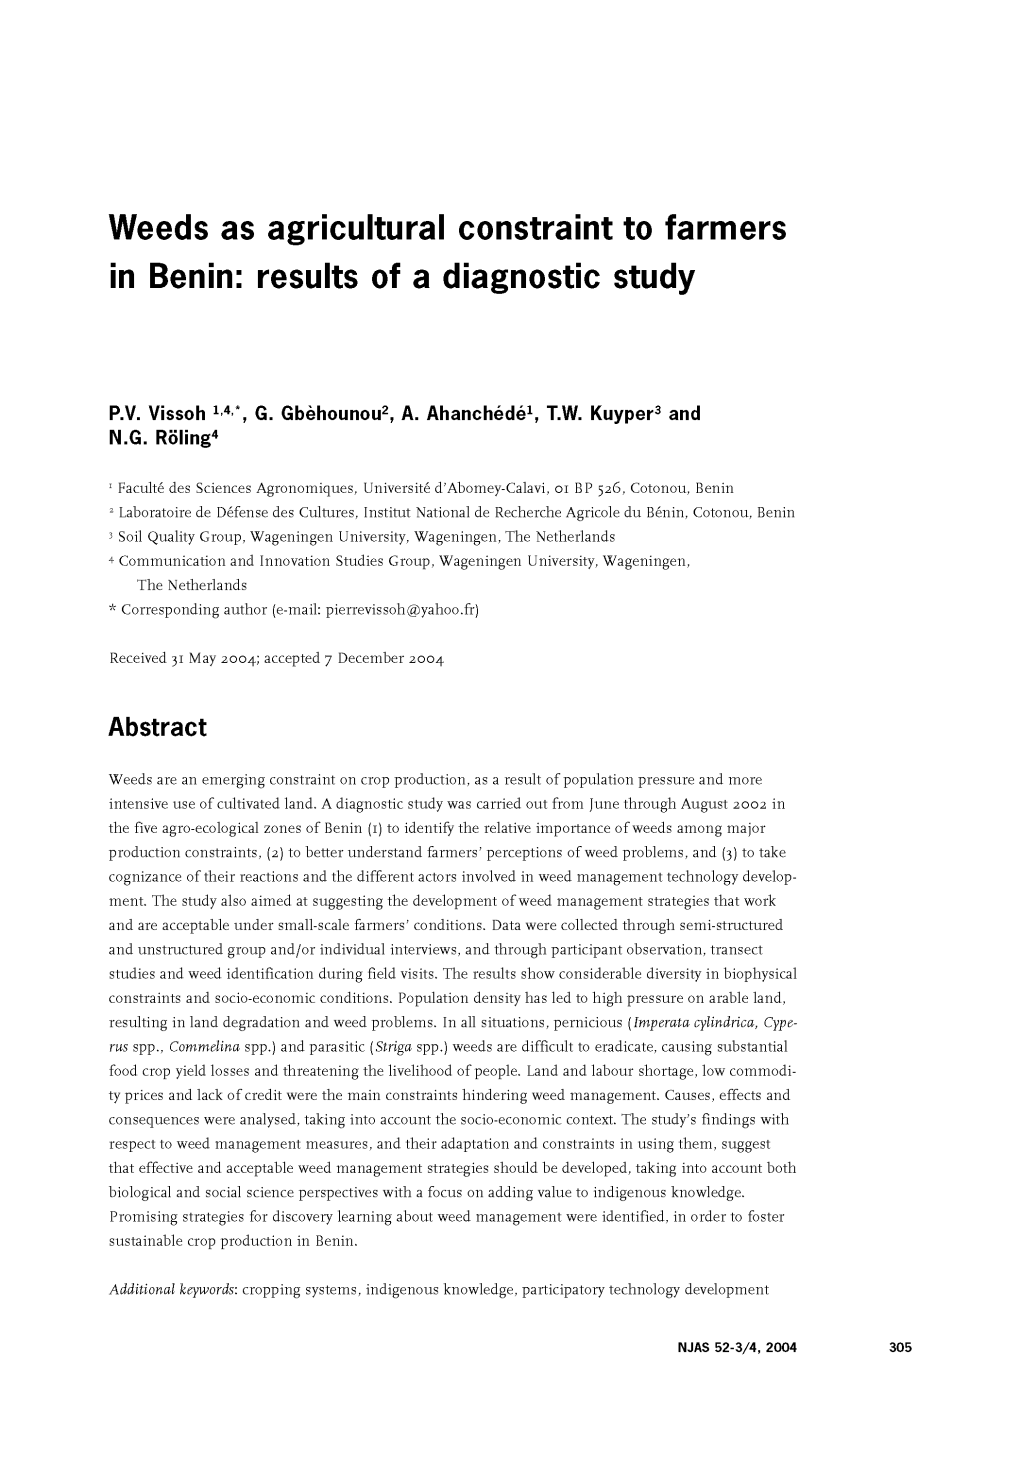 Weeds As Agricultural Constraint to Farmers in Benin: Results of a Diagnostic Study